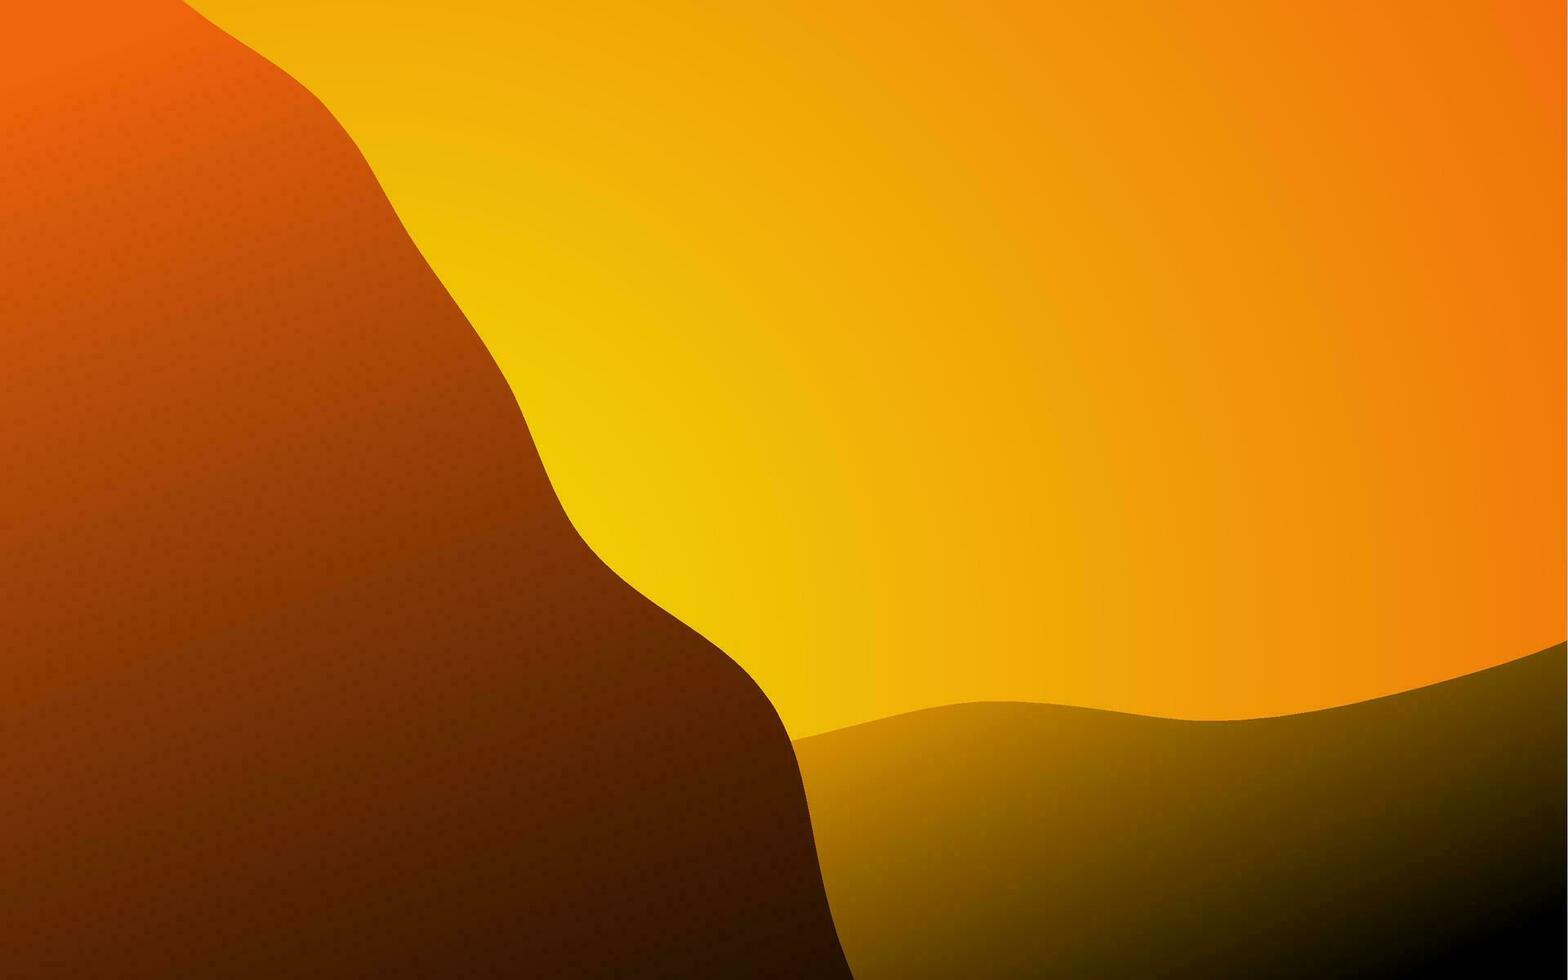 an abstract image of a mountain with a sun in the background vector